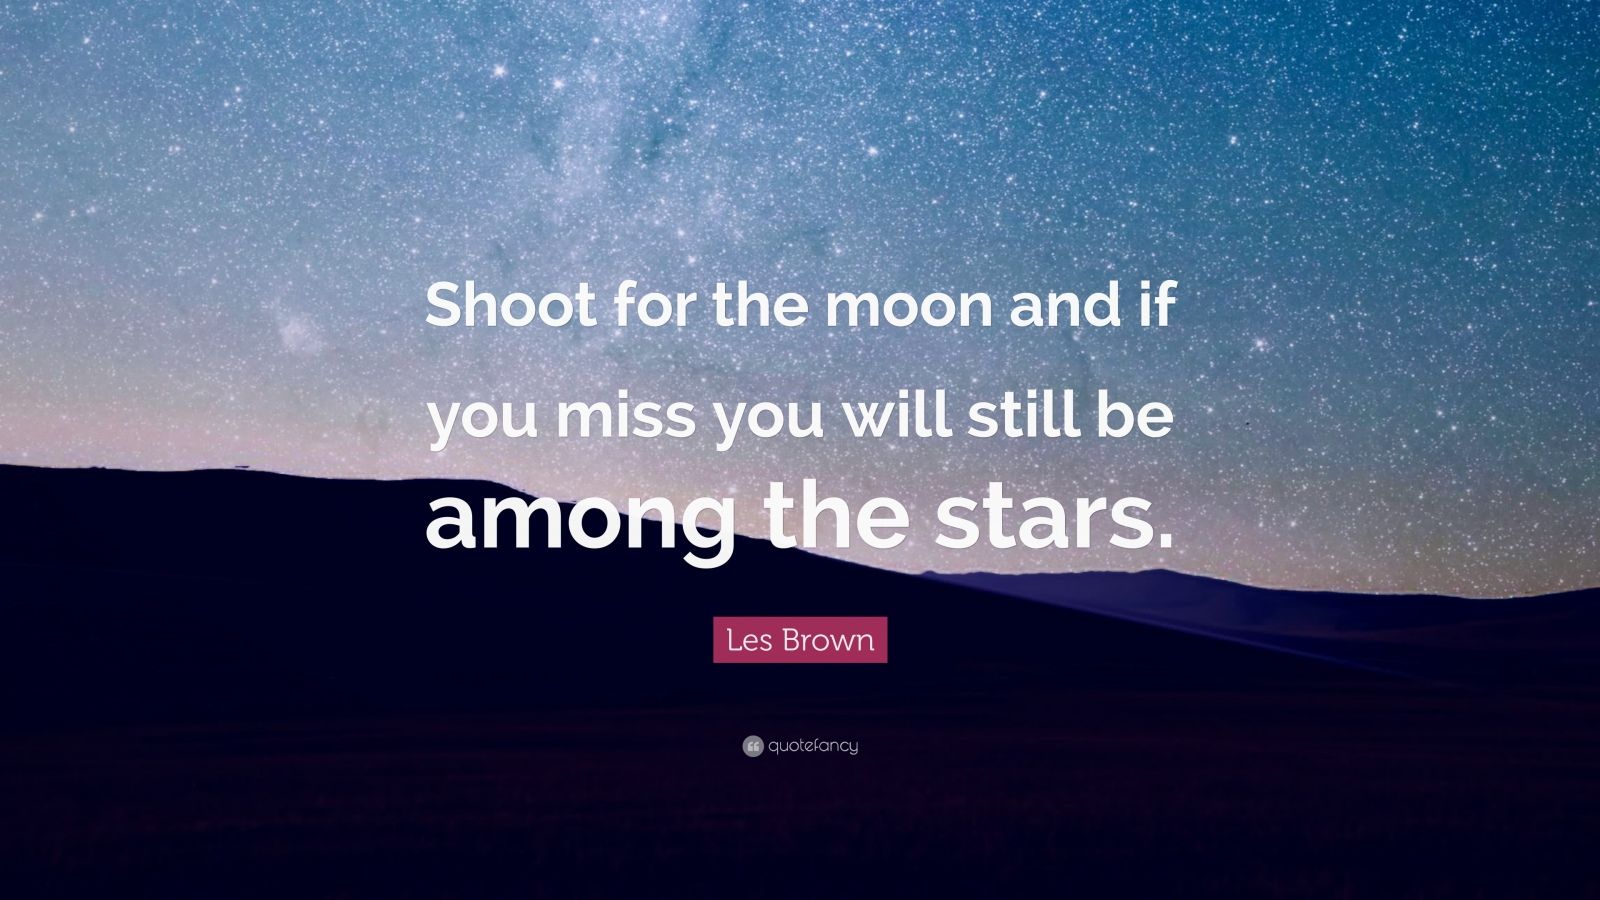 Les Brown Quote: “Shoot for the moon and if you miss you will still be